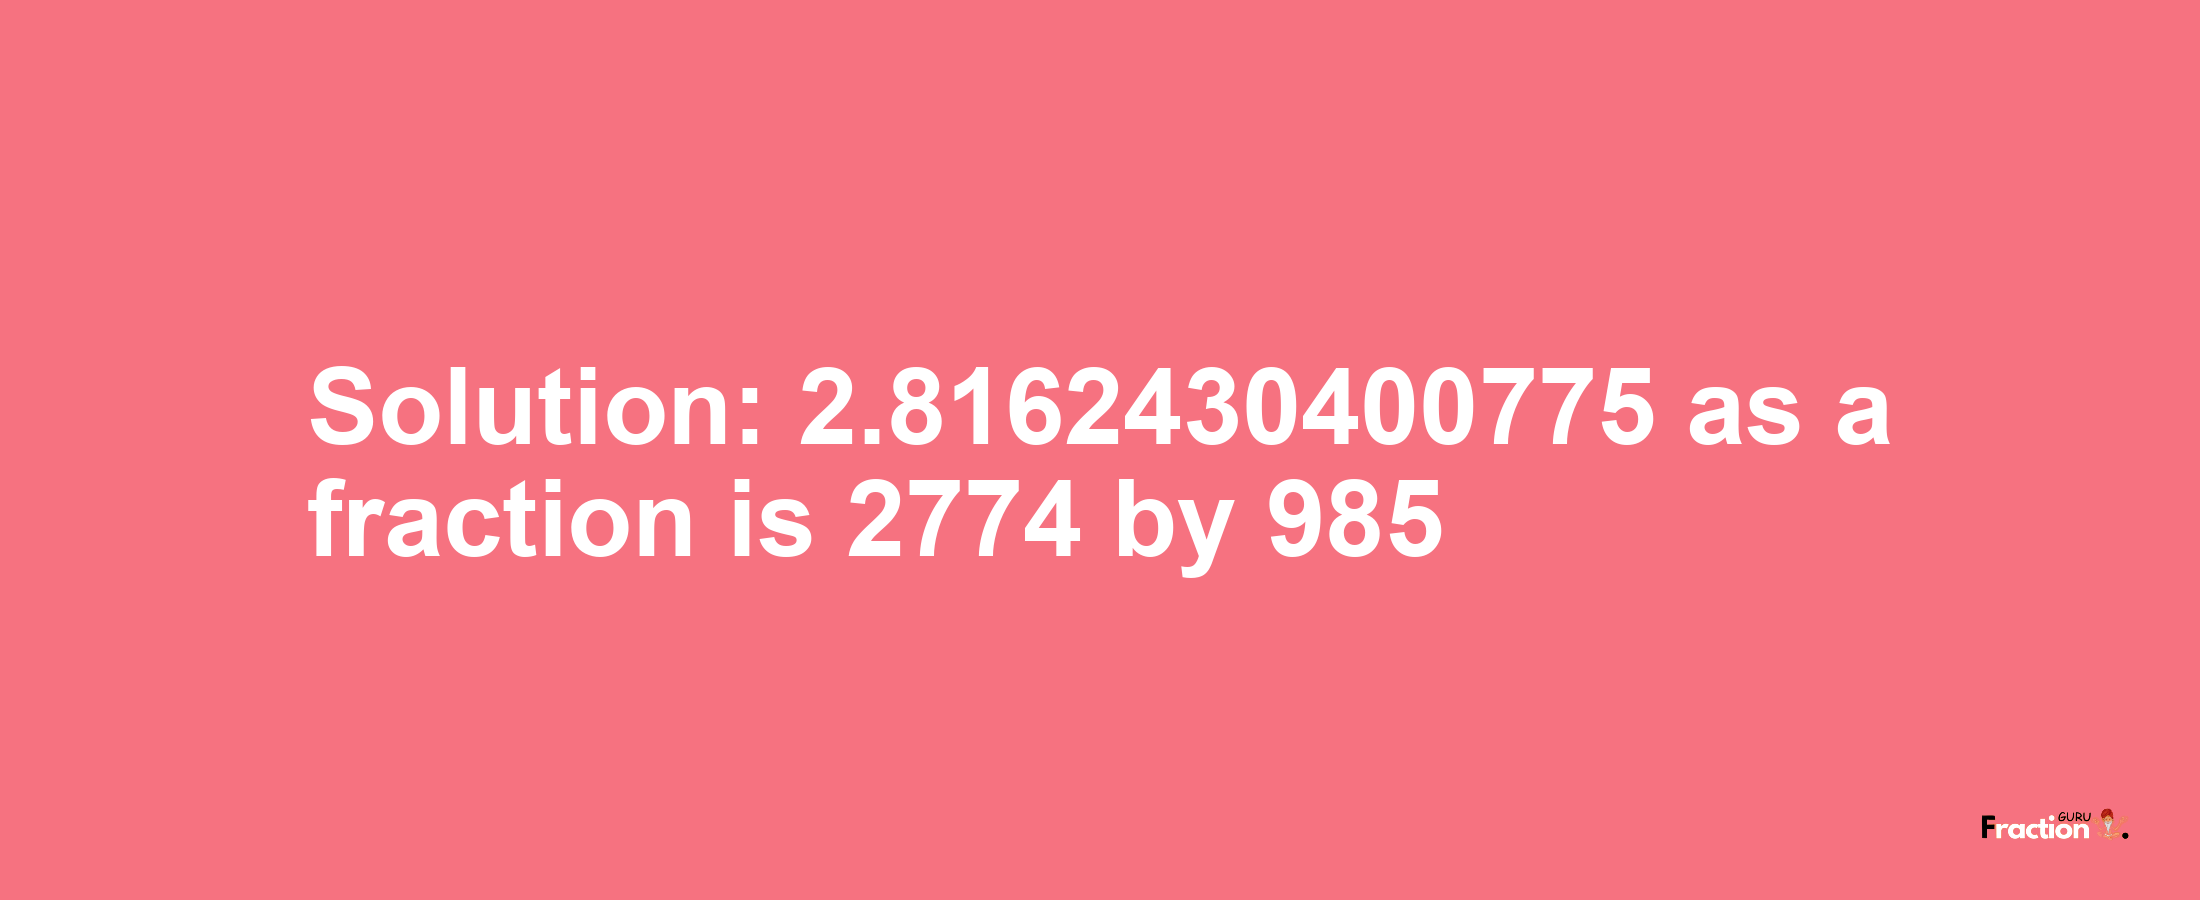 Solution:2.8162430400775 as a fraction is 2774/985